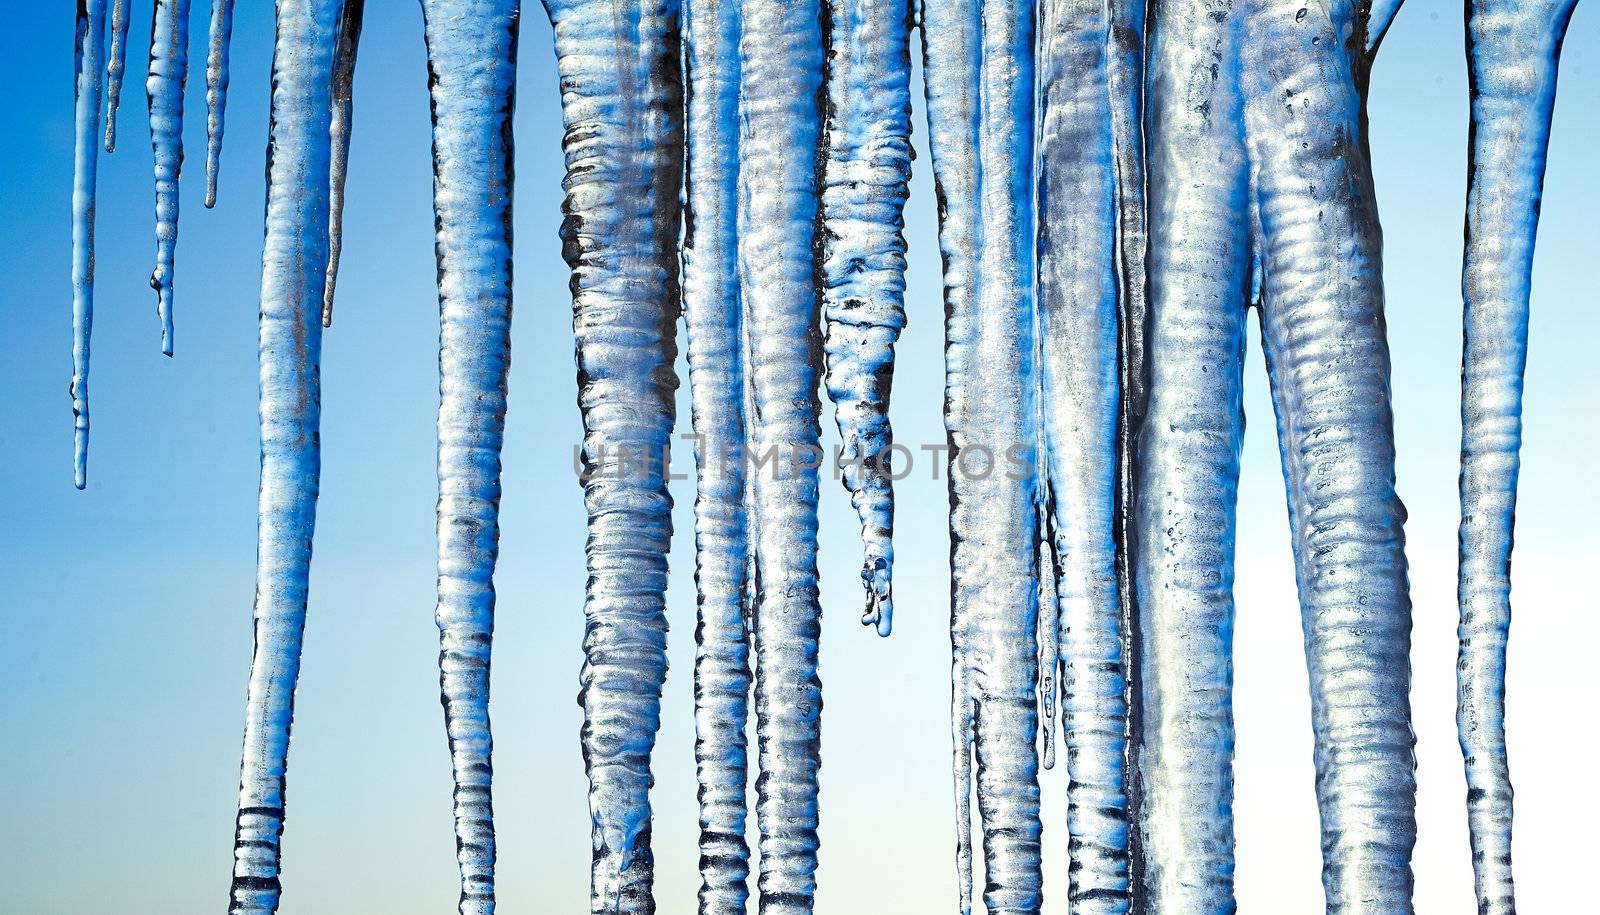 Long Icicles Isolated on Blue Sky by kirs-ua